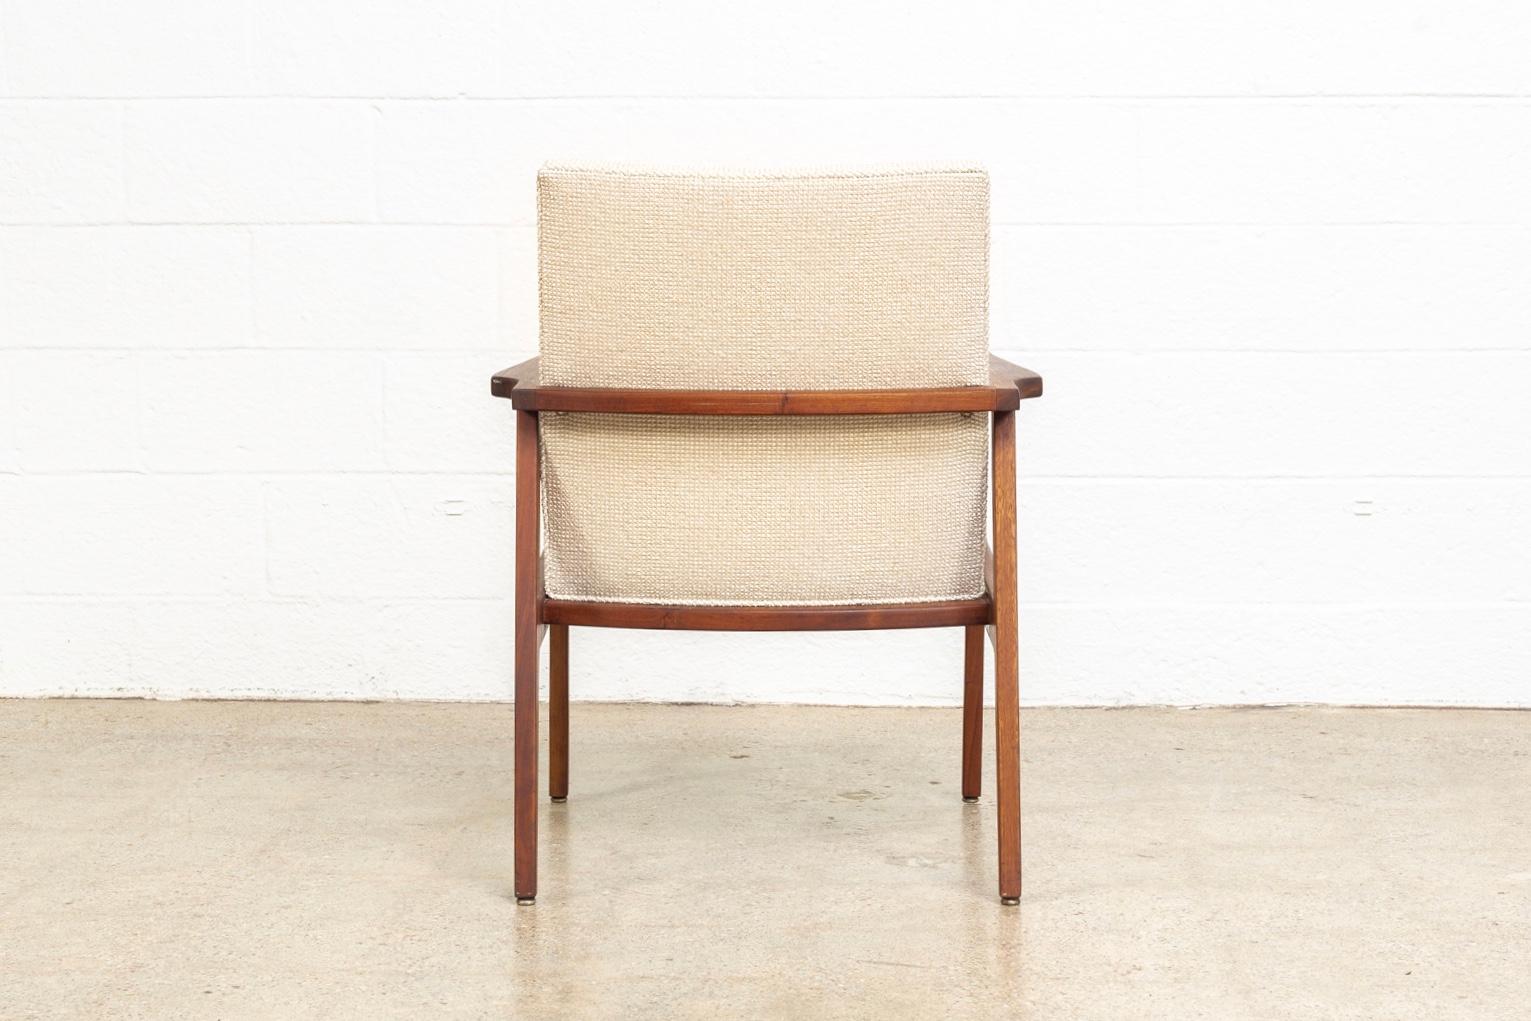 Midcentury Jens Risom Upholstered Lounge Chair, 1960s In Good Condition For Sale In Detroit, MI